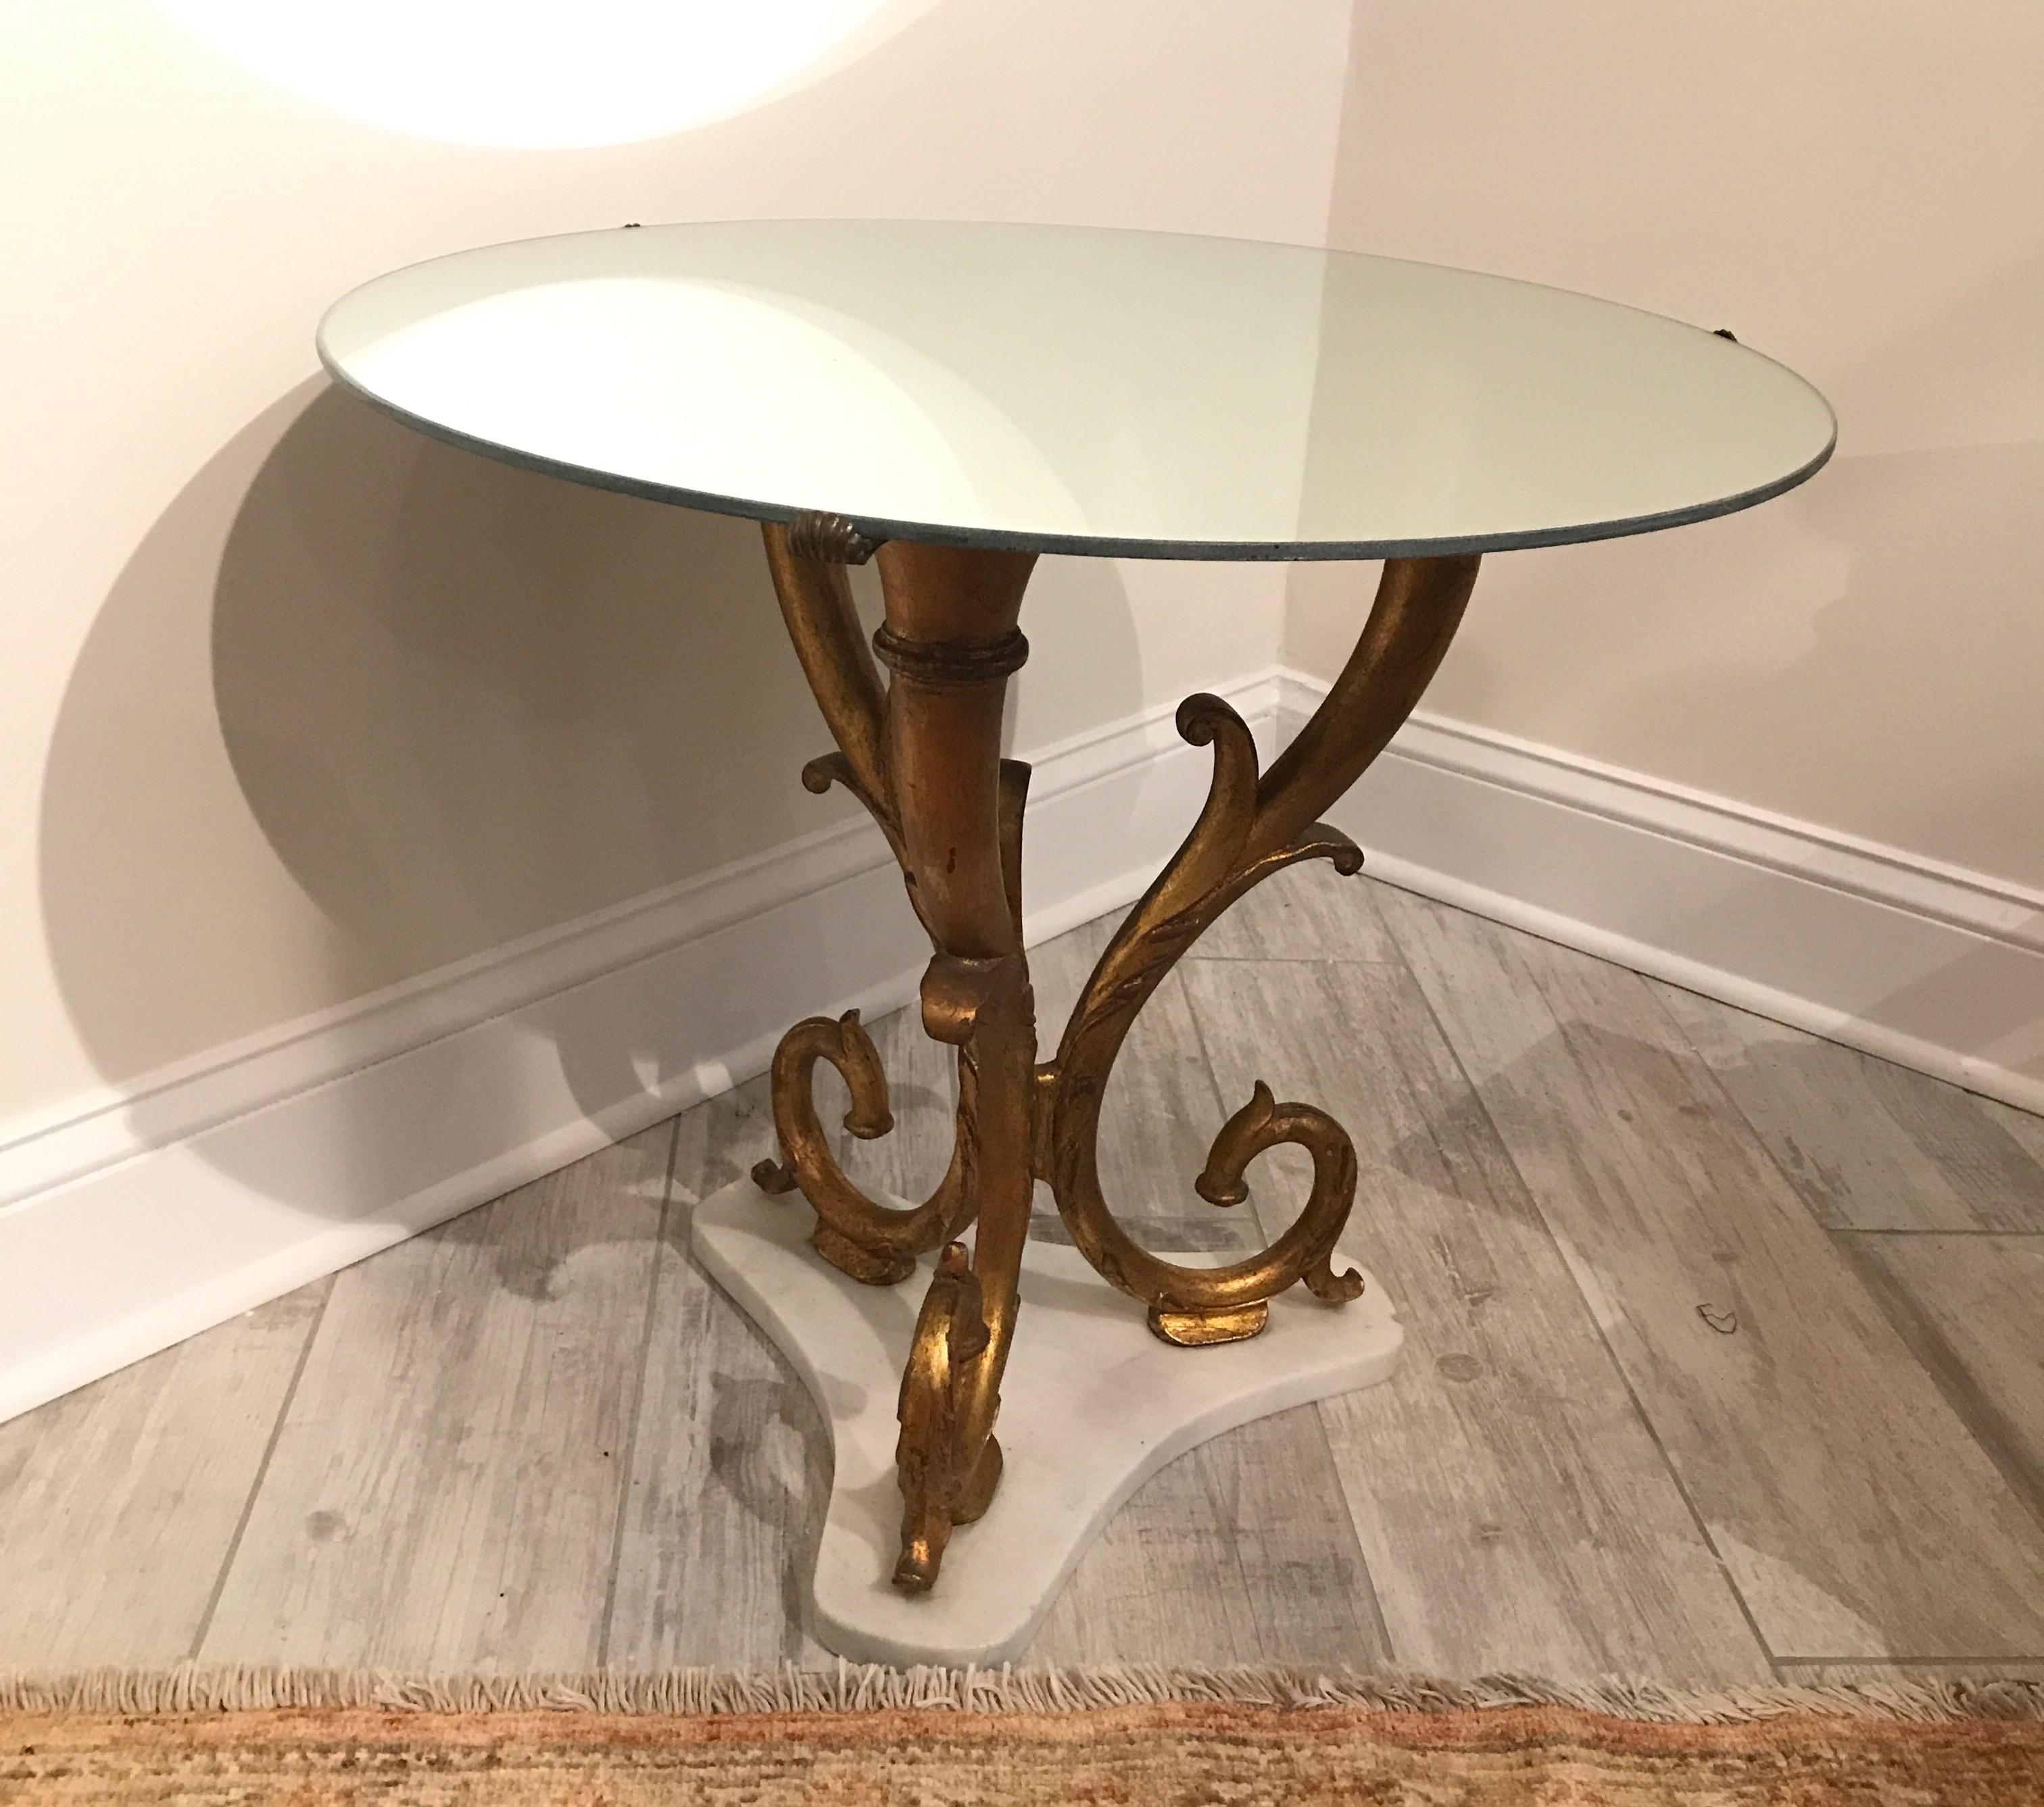 Round gilded iron side table with white marble base and mirrored top. This is a vintage Italian table by Palladio.